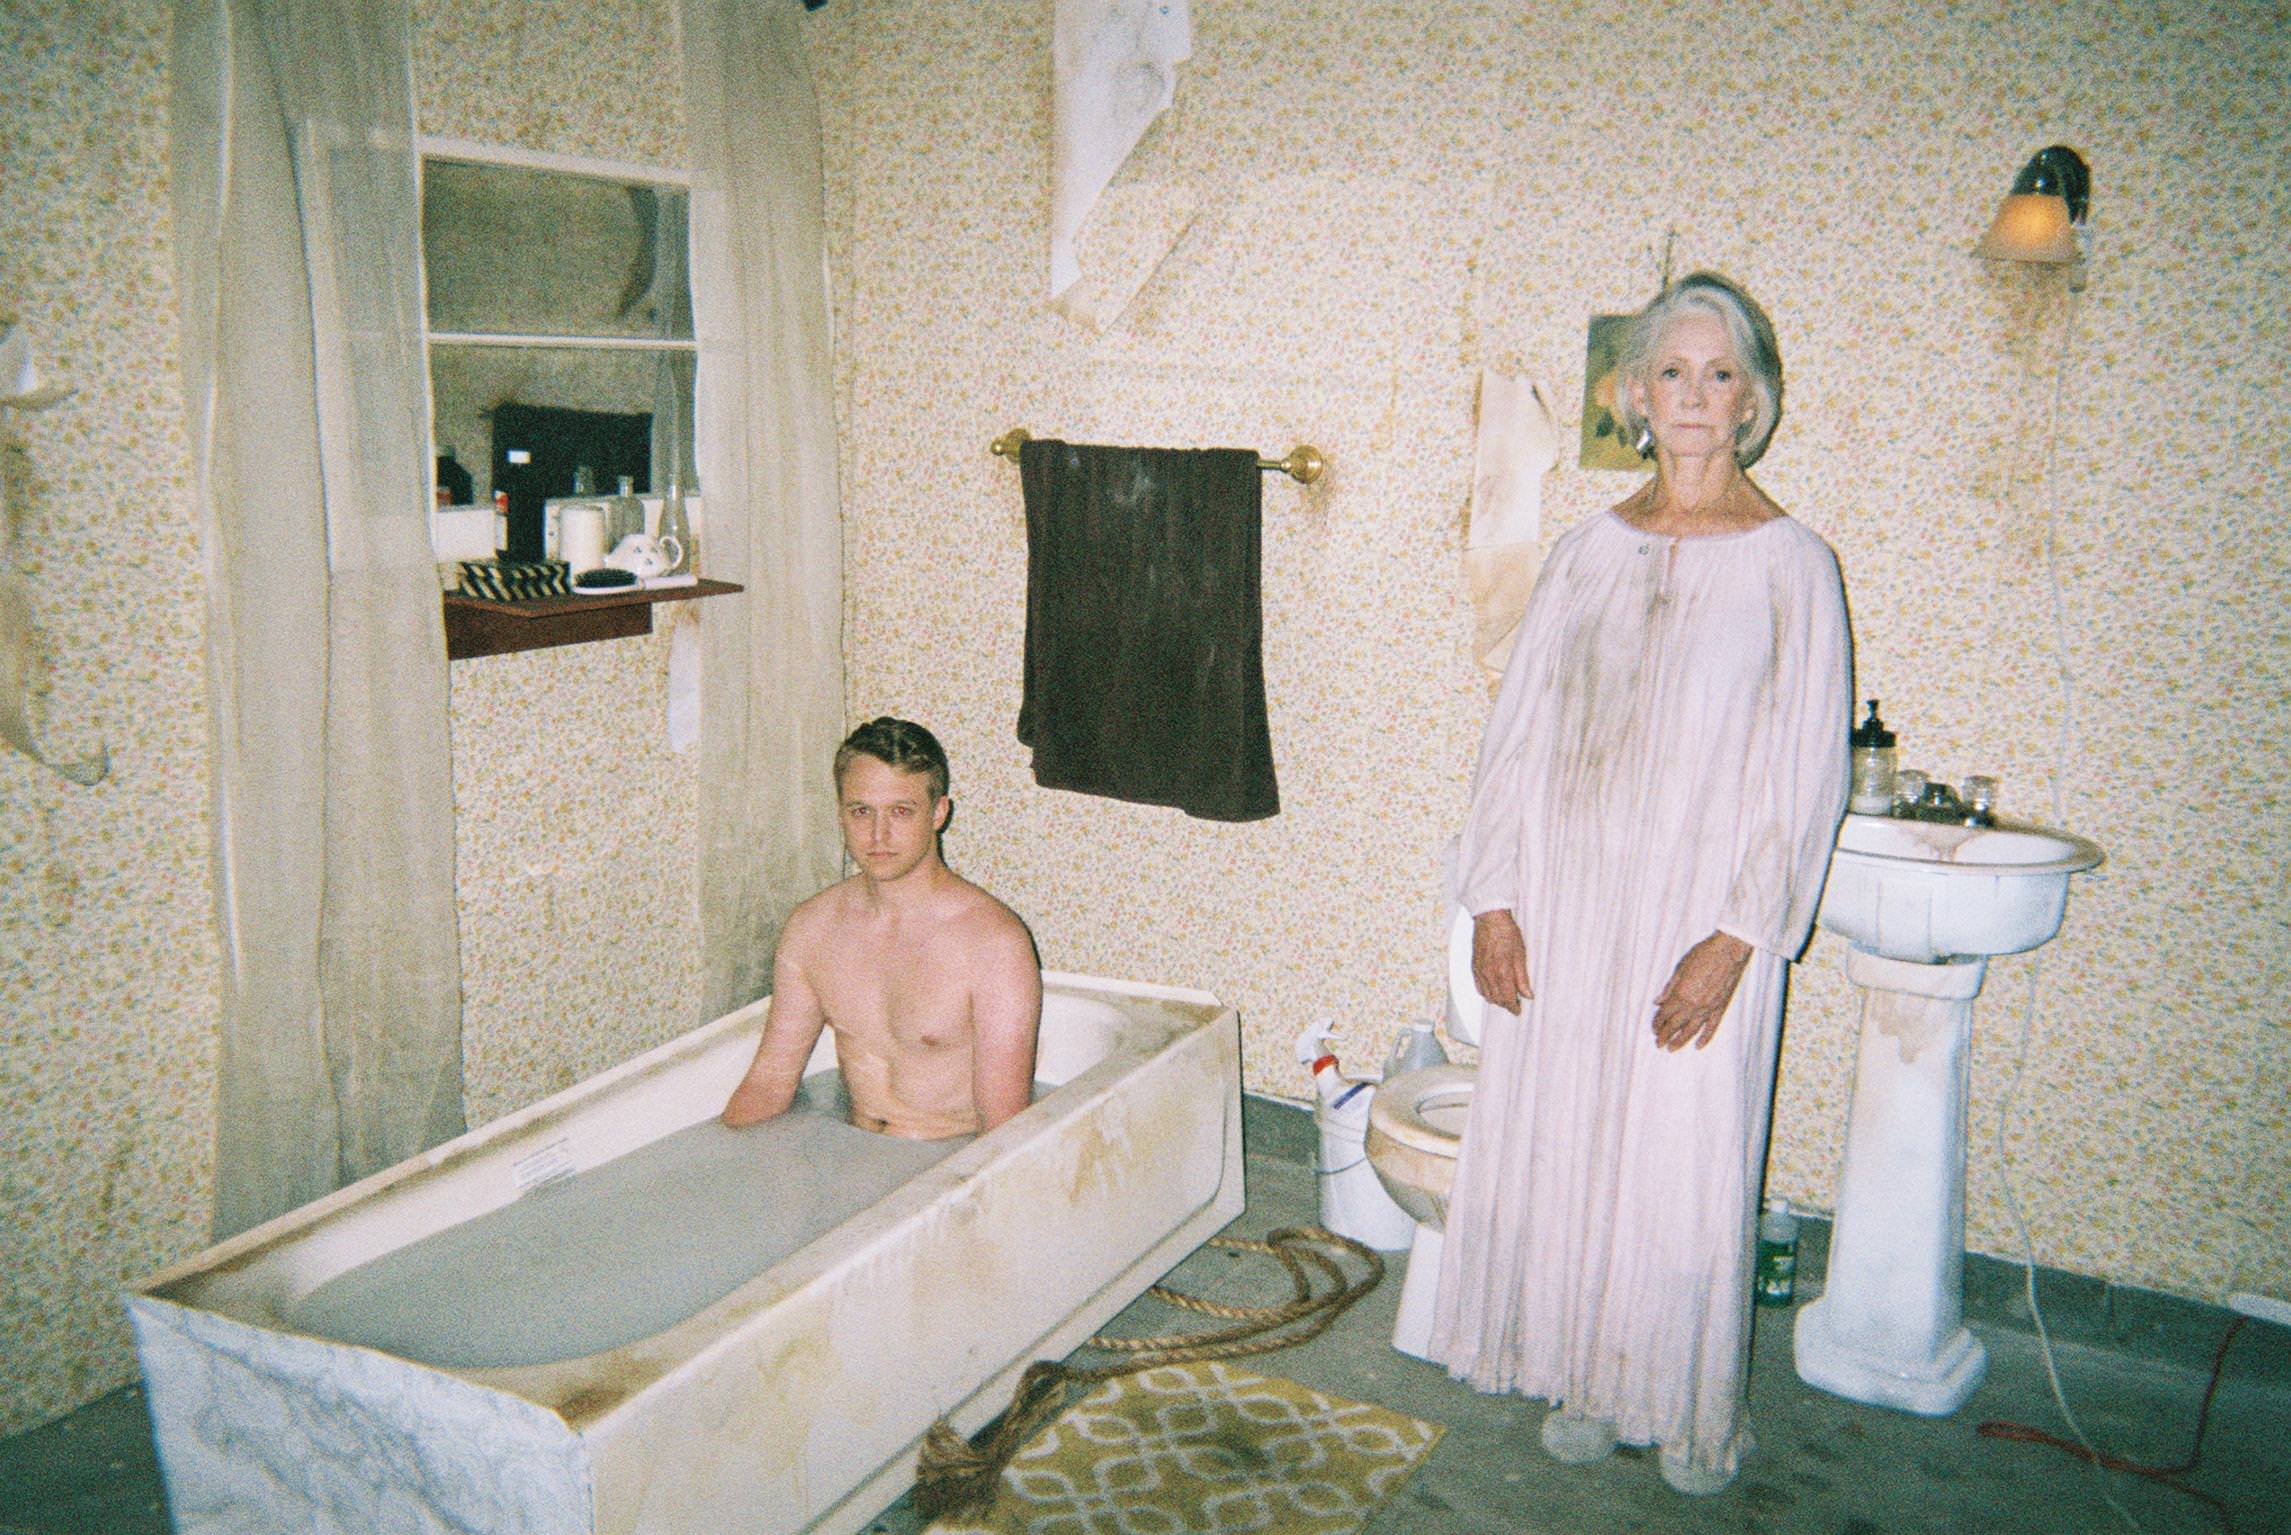 Extremely Creepy Website Poses Men In Tubs Full Of Milk